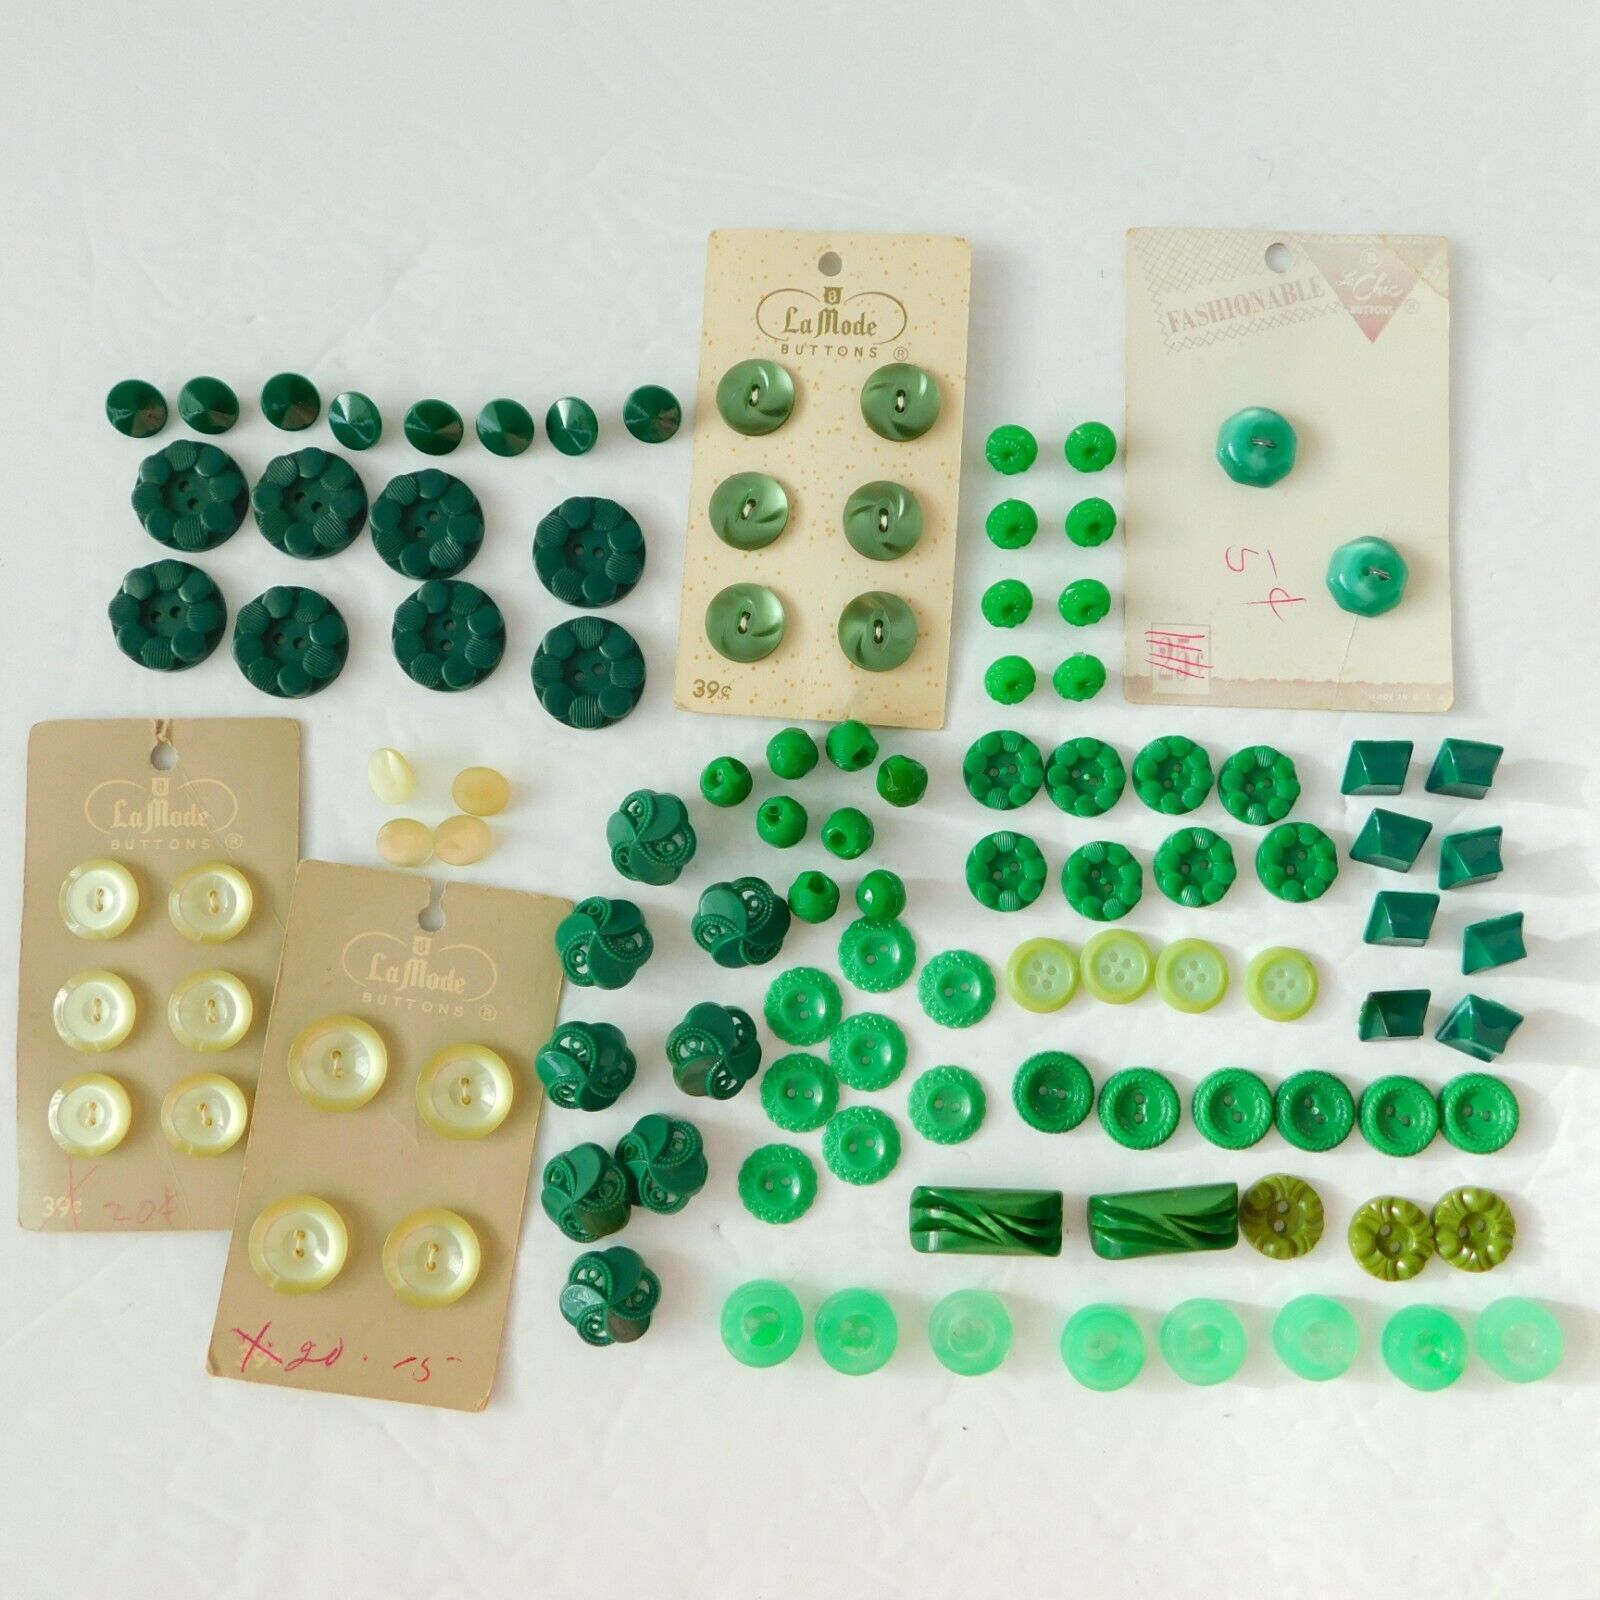 100+ Vintage Green Button Lot, Carded and Loose, La Monde, Le Chic (as shown)